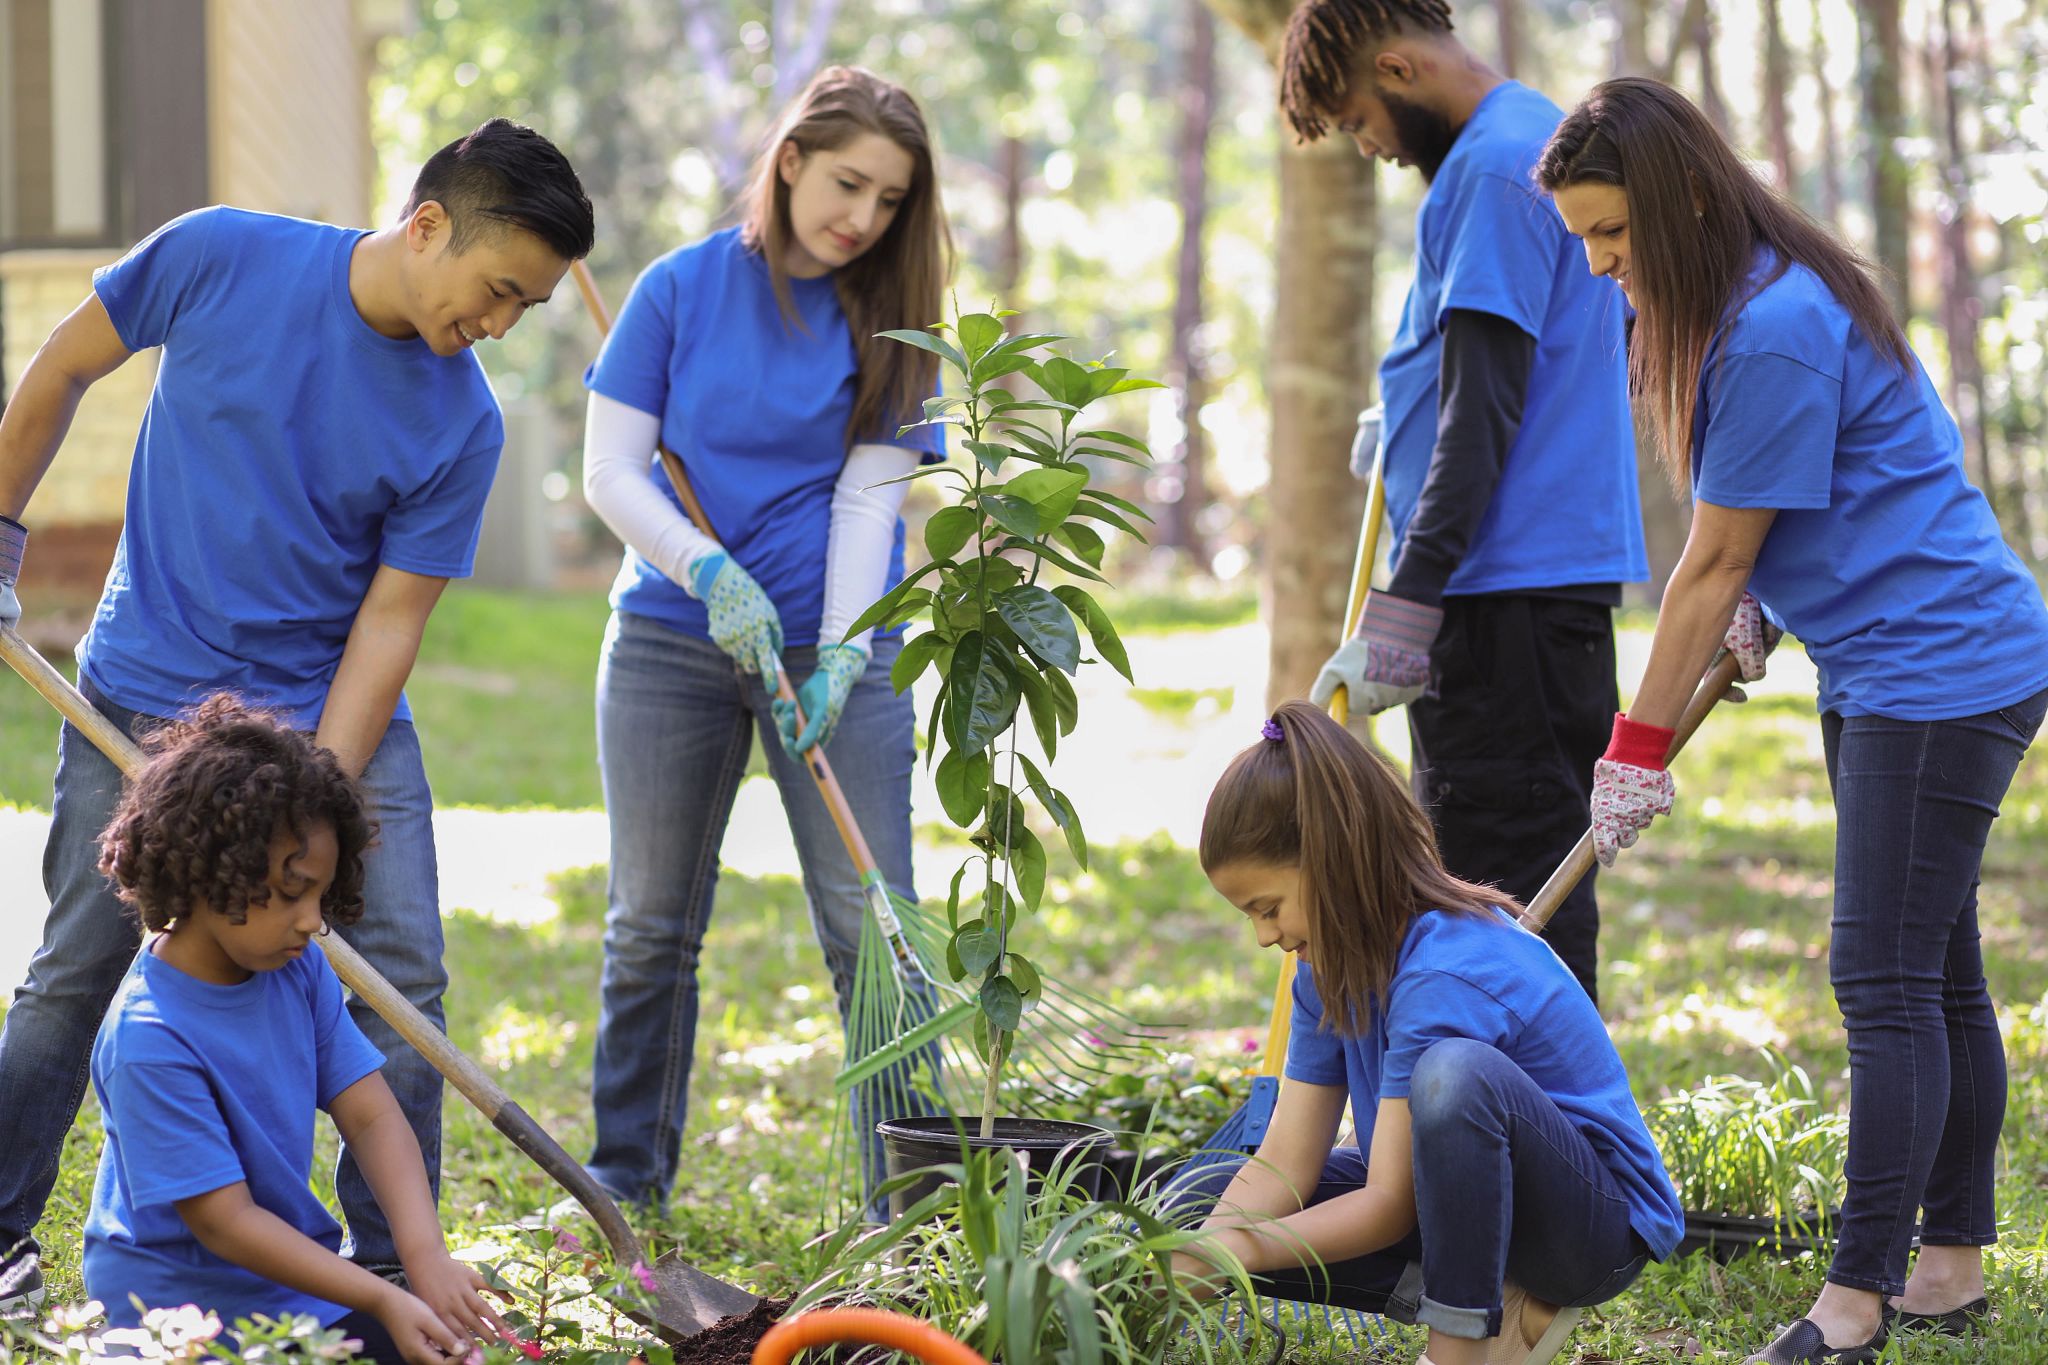 An image of people working on planting a tree outdoors.